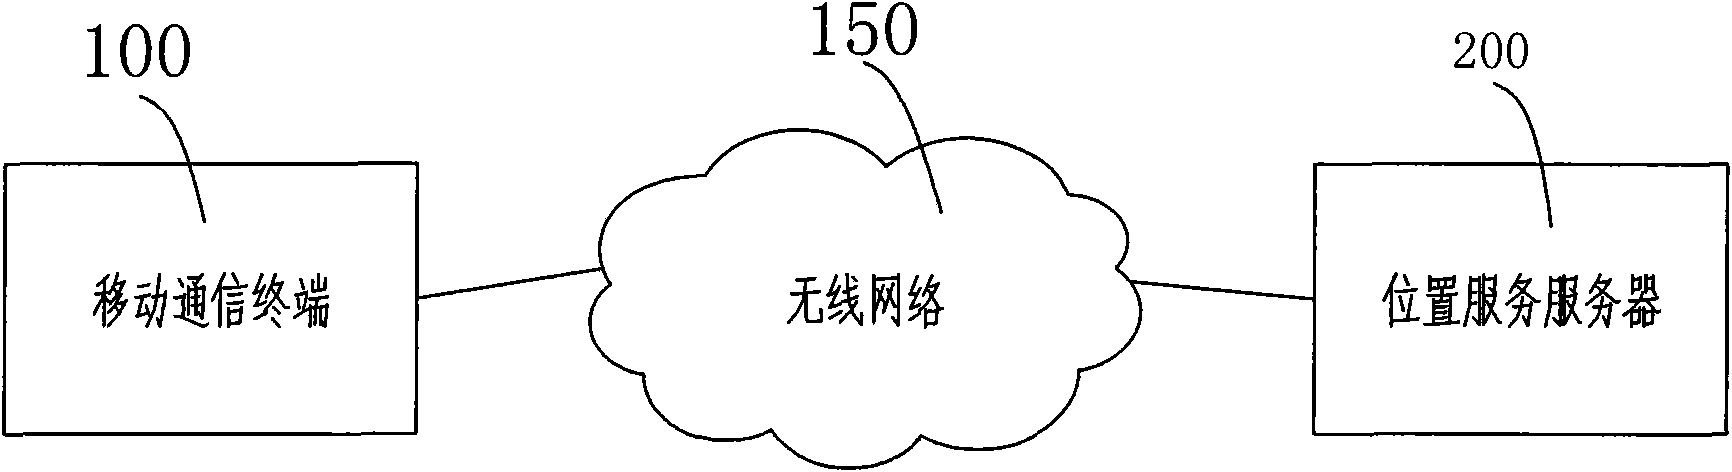 Terminal service method for providing geographic information tags for digital photos